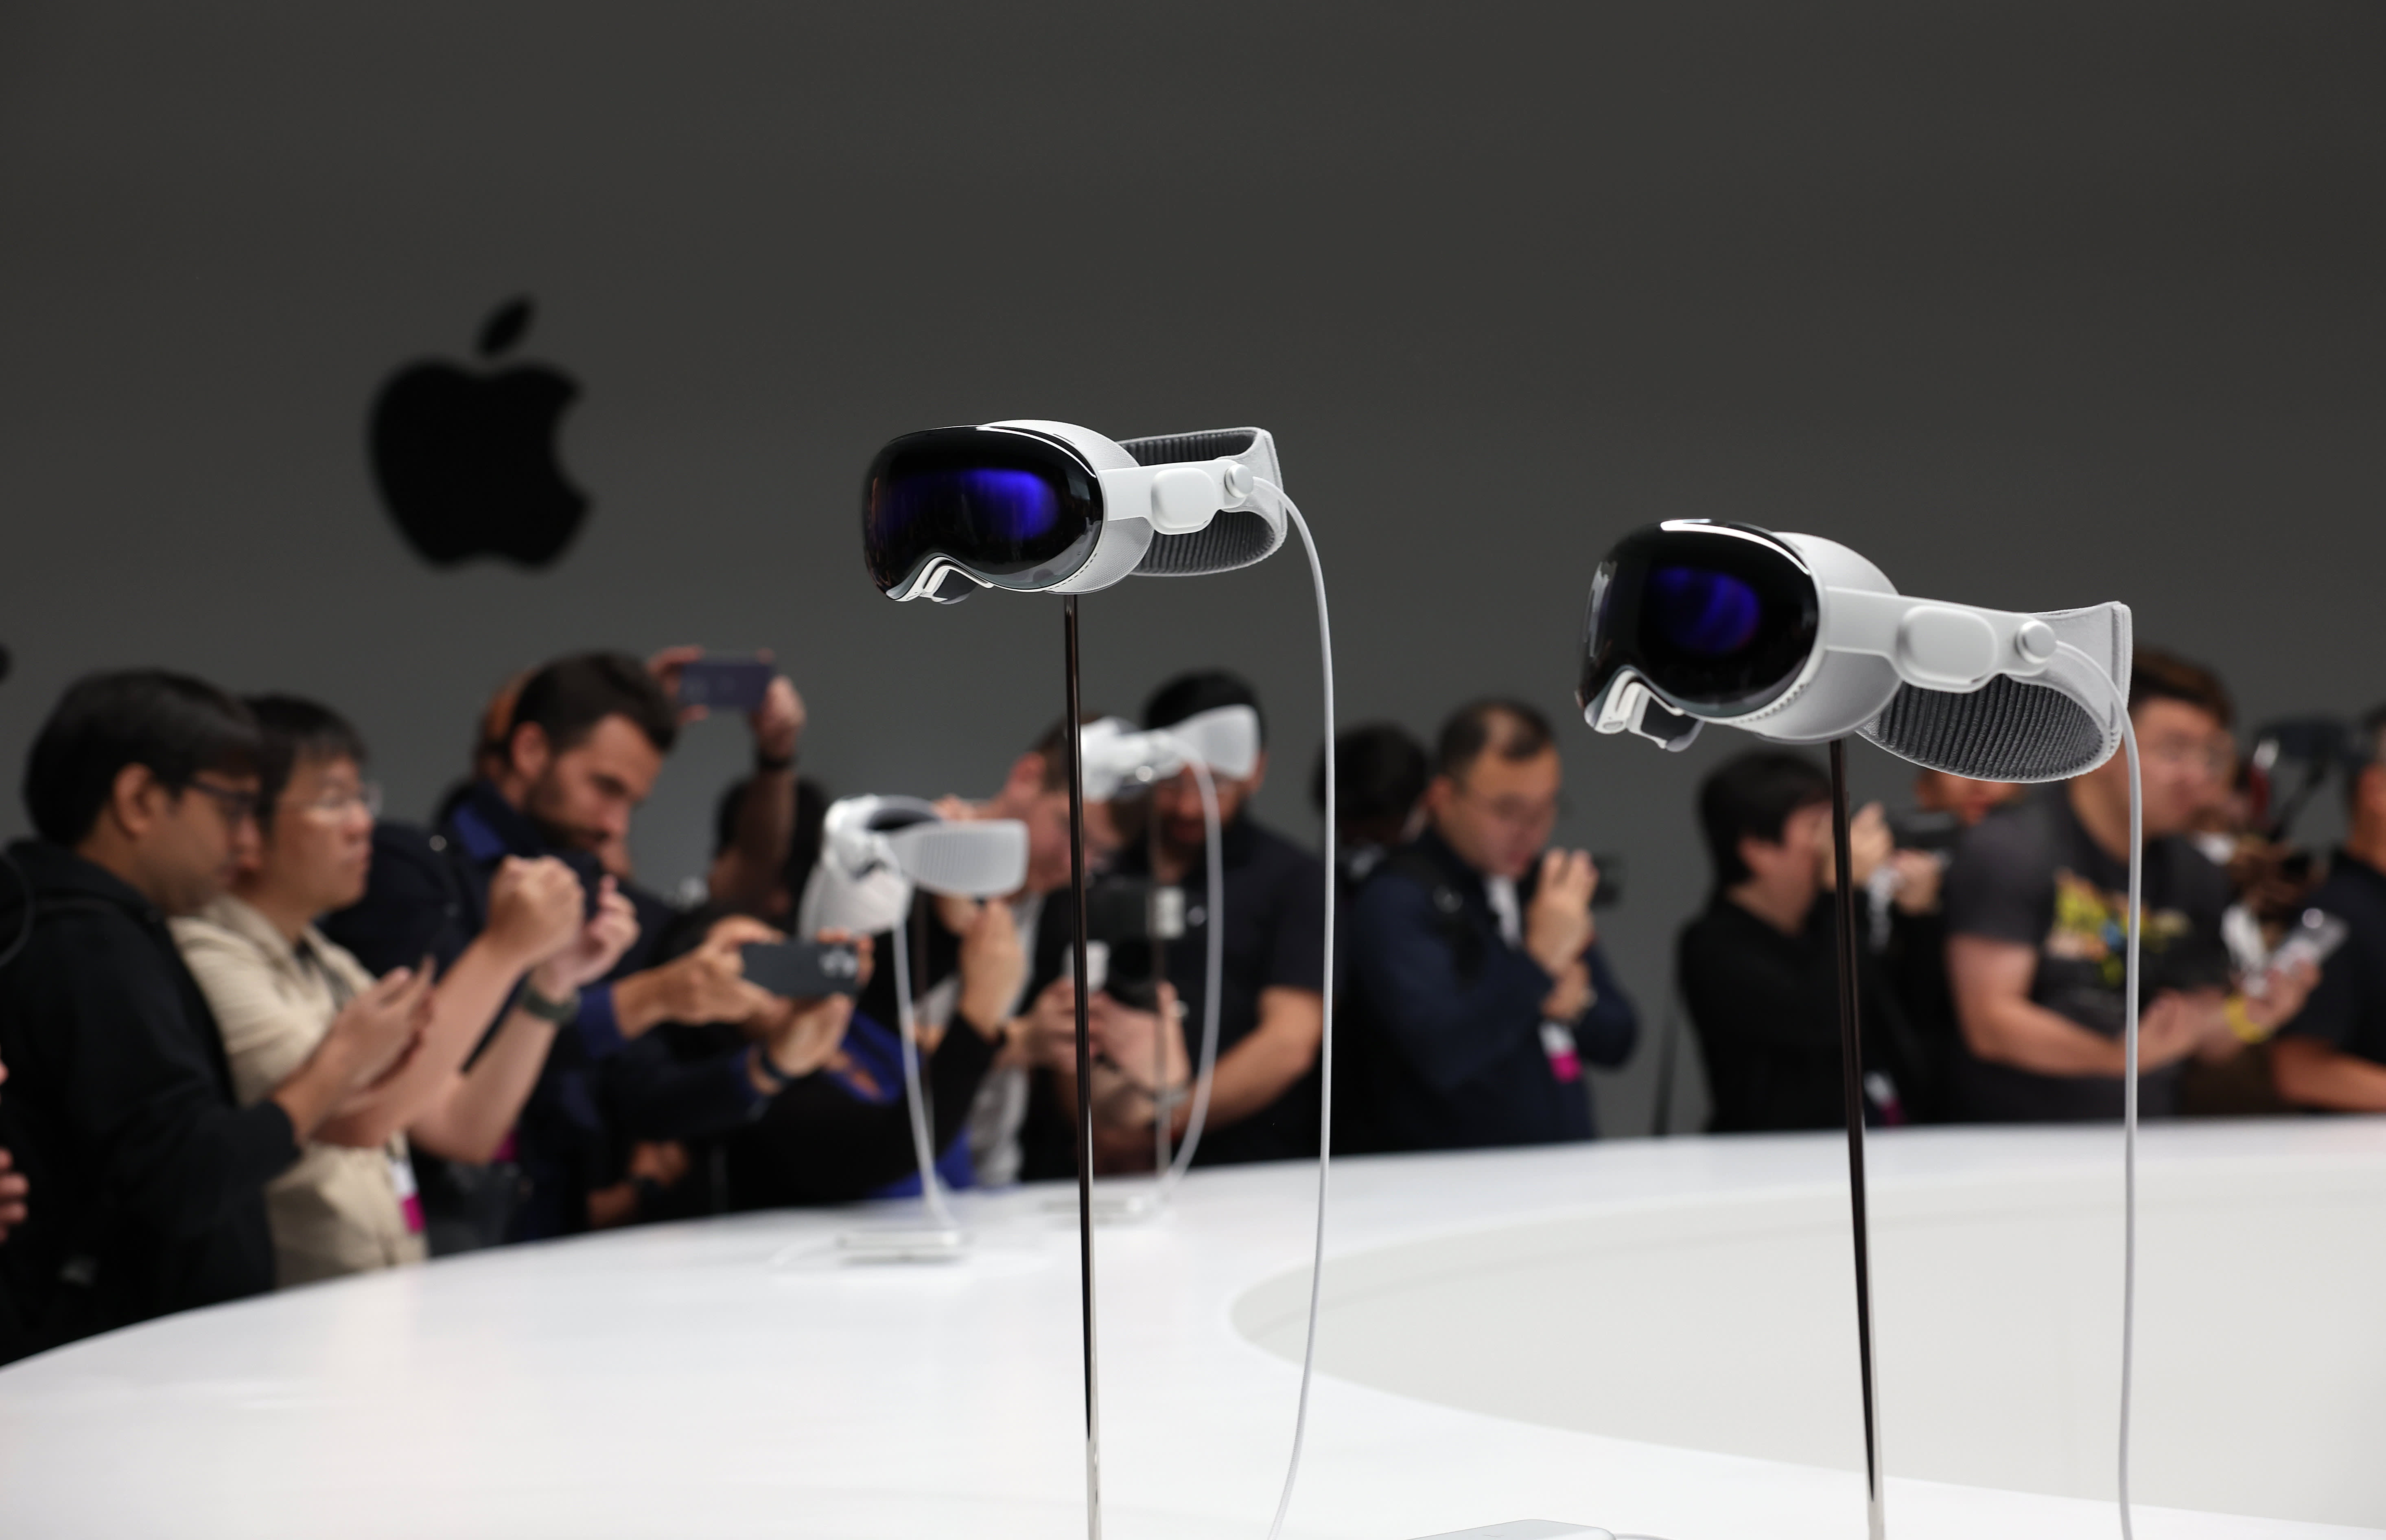 D.A. Davidson downgrades Apple to neutral, says Vision Pro is already priced into the stock